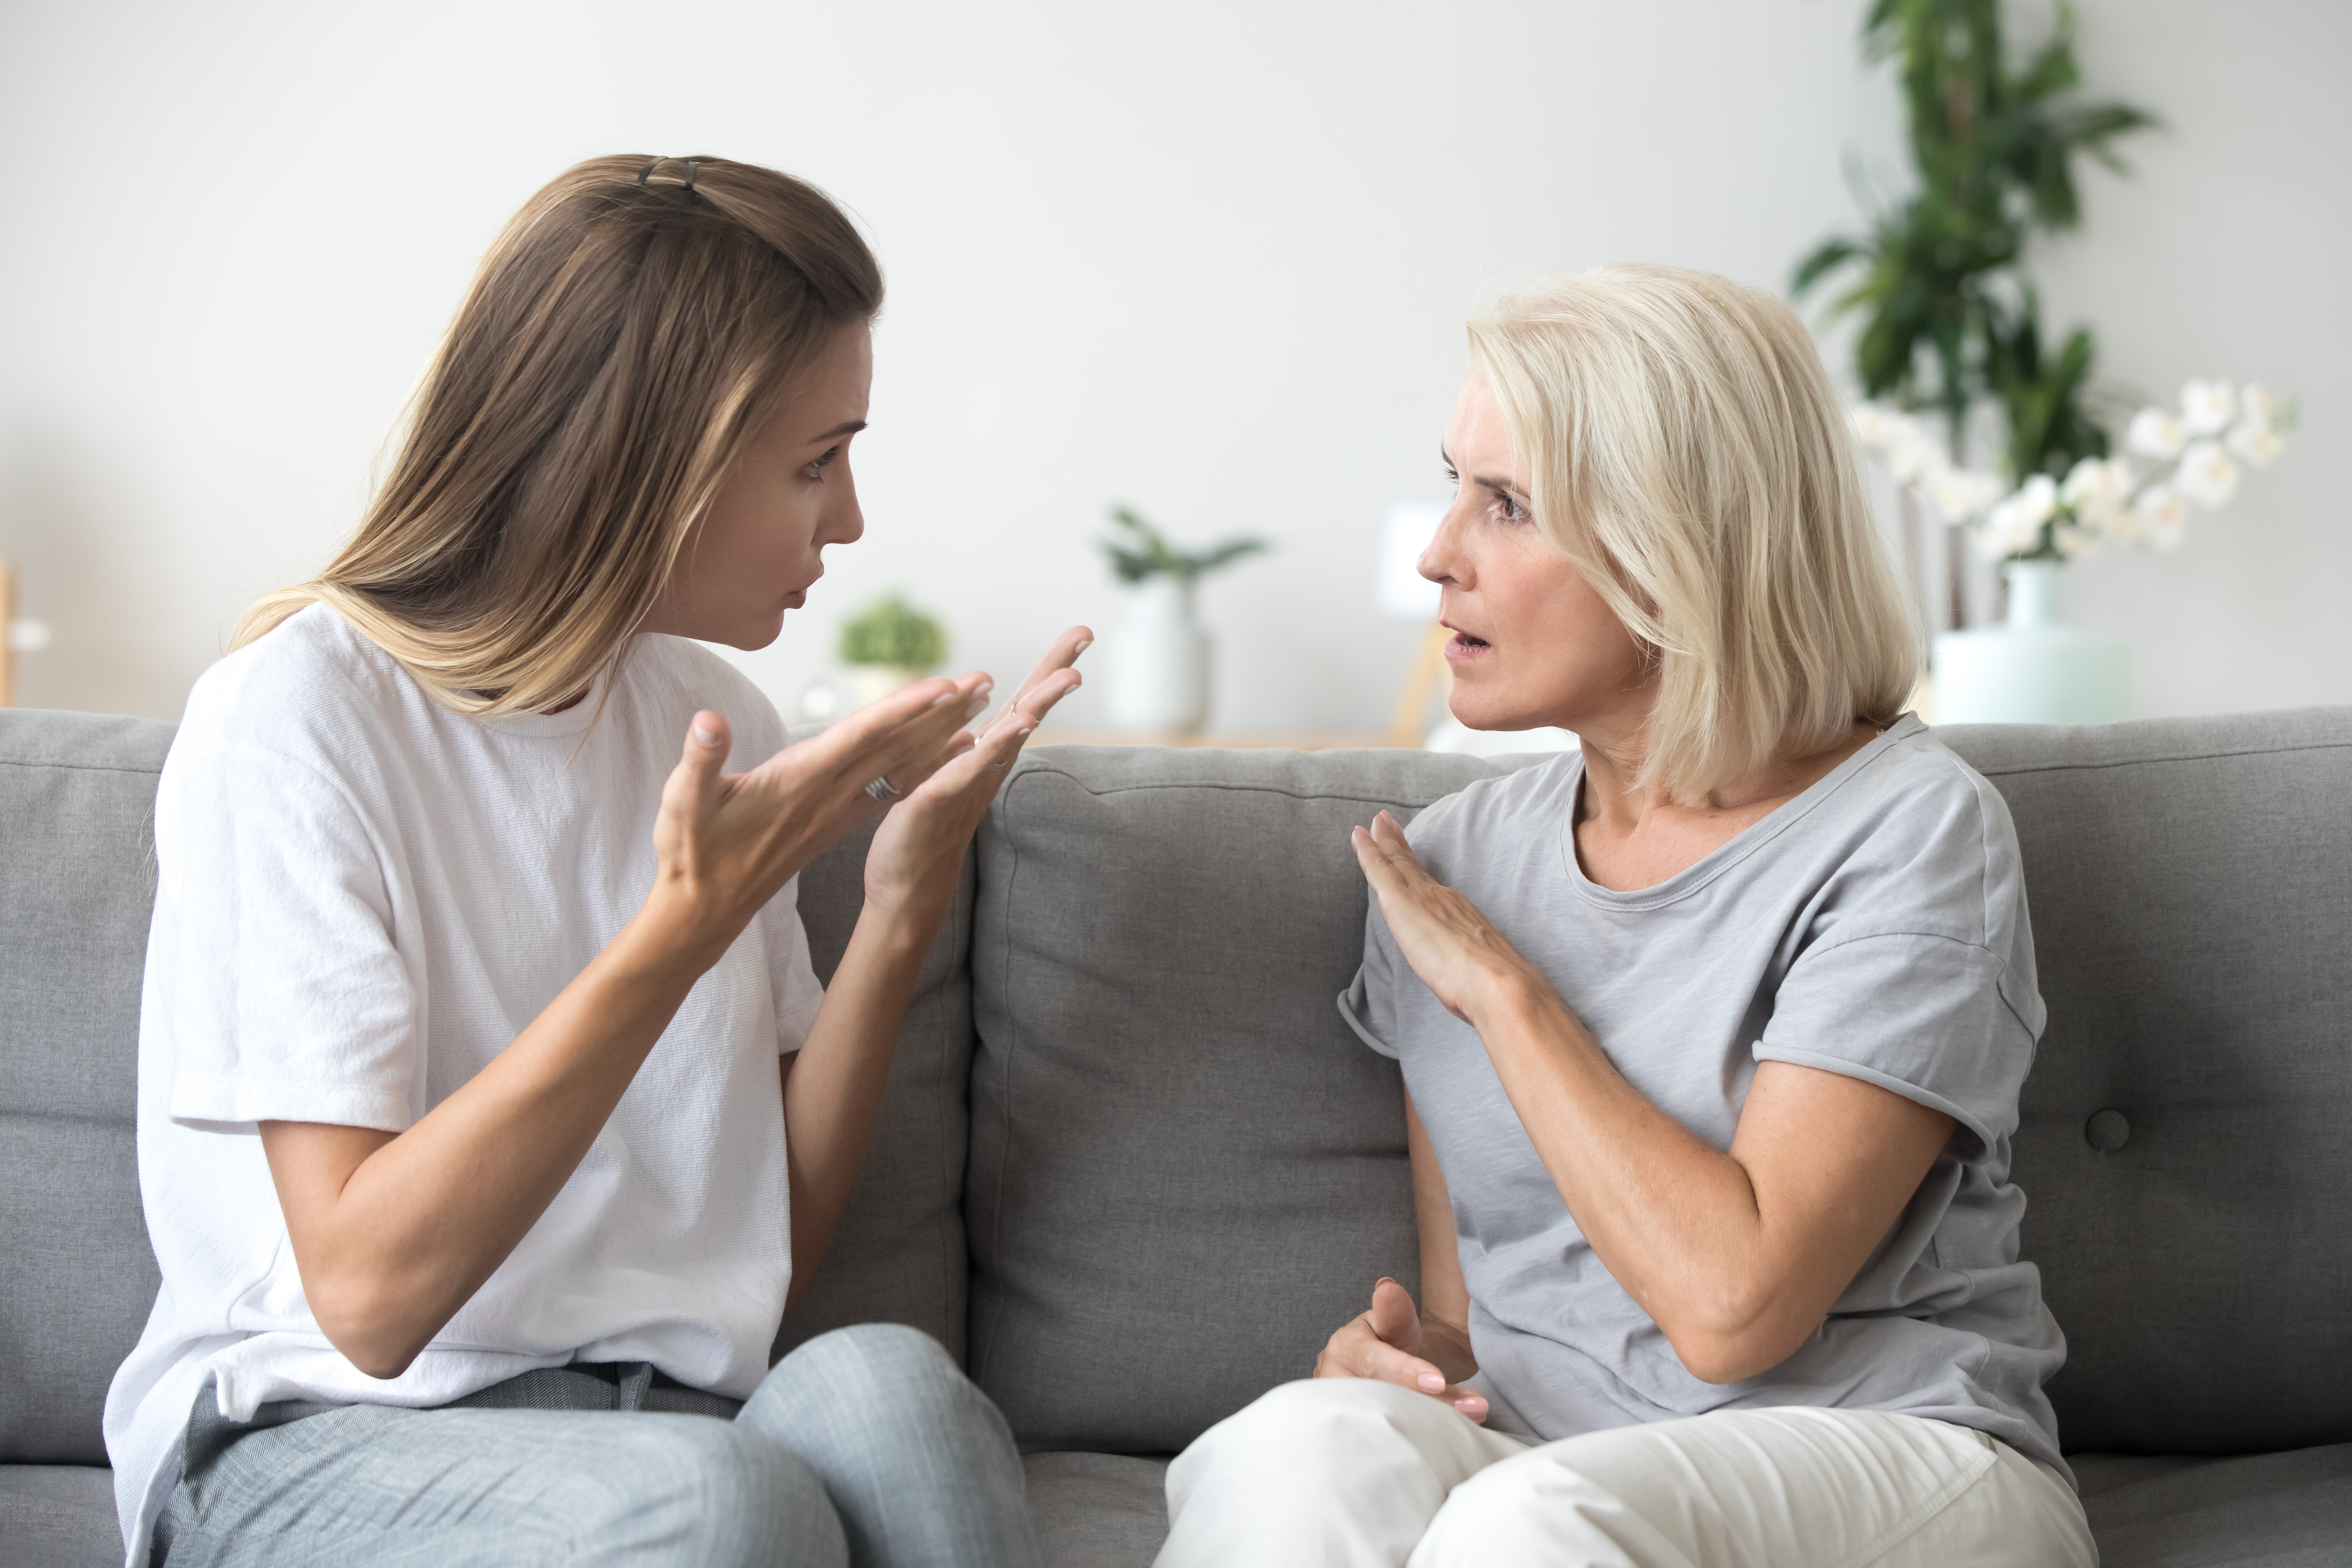 A young woman and a senior lady are pictured having an argument | Source: Shutterstock